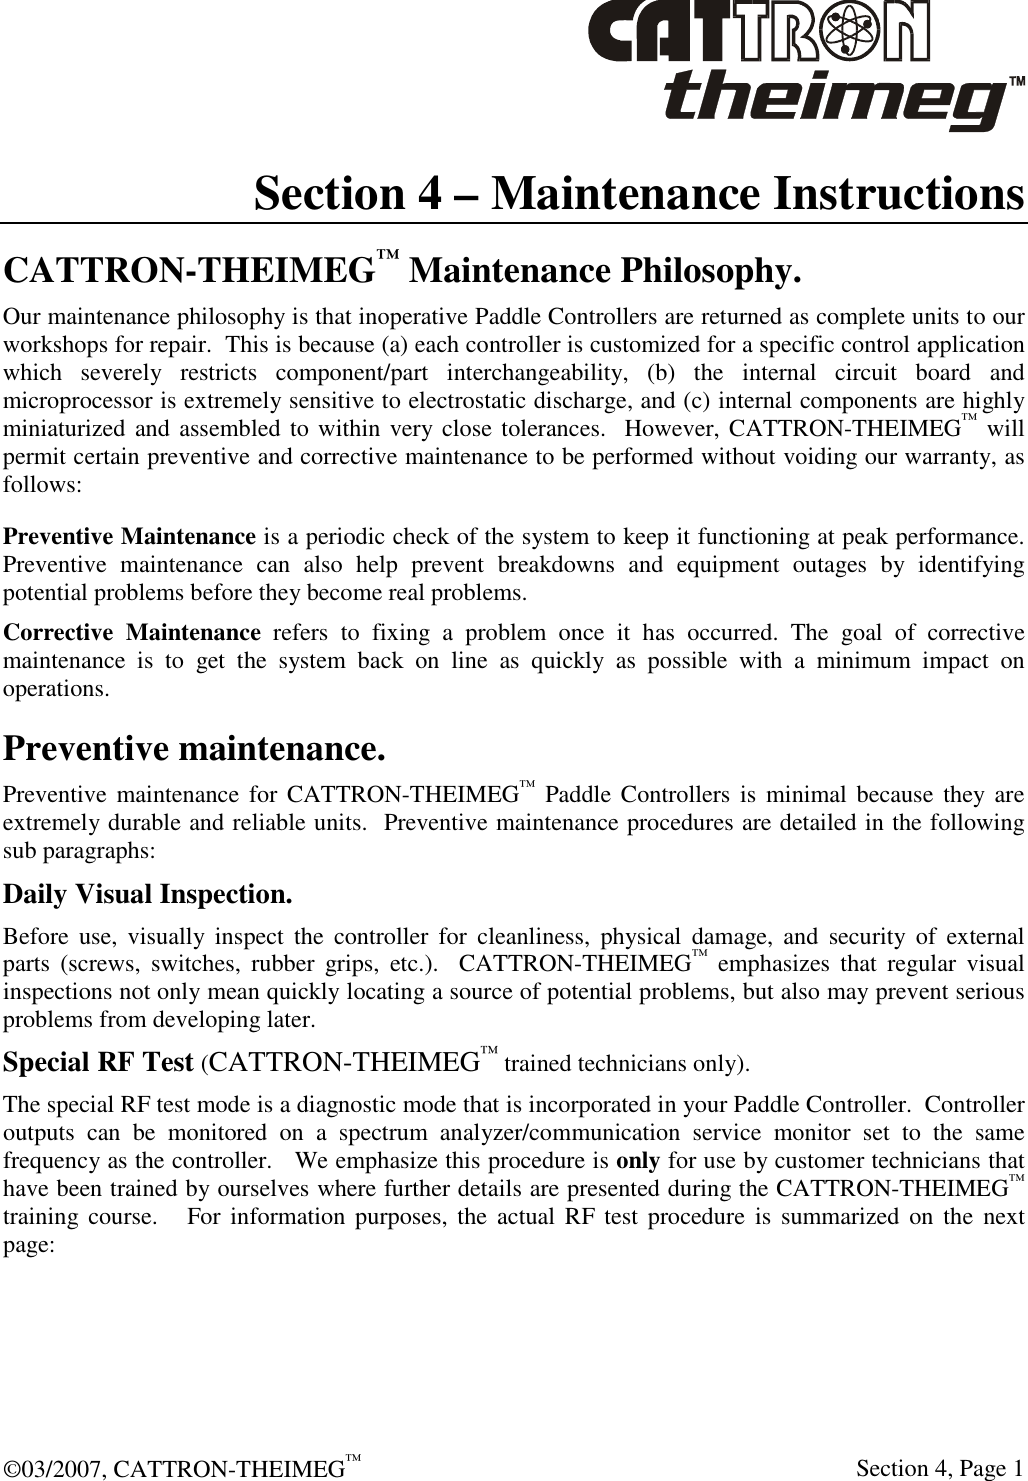  ©03/2007, CATTRON-THEIMEG™     Section 4, Page 1 Section 4 – Maintenance Instructions CATTRON-THEIMEG™ Maintenance Philosophy. Our maintenance philosophy is that inoperative Paddle Controllers are returned as complete units to our workshops for repair.  This is because (a) each controller is customized for a specific control application which  severely  restricts  component/part  interchangeability,  (b)  the  internal  circuit  board  and microprocessor is extremely sensitive to electrostatic discharge, and (c) internal components are highly miniaturized and assembled to within very close tolerances.  However, CATTRON-THEIMEG™ will permit certain preventive and corrective maintenance to be performed without voiding our warranty, as follows:    Preventive Maintenance is a periodic check of the system to keep it functioning at peak performance. Preventive  maintenance  can  also  help  prevent  breakdowns  and  equipment  outages  by  identifying potential problems before they become real problems.  Corrective  Maintenance  refers  to  fixing  a  problem  once  it  has  occurred.  The  goal  of  corrective maintenance  is  to  get  the  system  back  on  line  as  quickly  as  possible  with  a  minimum  impact  on operations. Preventive maintenance. Preventive maintenance  for CATTRON-THEIMEG™  Paddle  Controllers is minimal because they  are extremely durable and reliable units.  Preventive maintenance procedures are detailed in the following sub paragraphs: Daily Visual Inspection. Before  use,  visually  inspect  the  controller  for  cleanliness,  physical  damage,  and  security  of  external parts  (screws,  switches,  rubber  grips,  etc.).    CATTRON-THEIMEG™  emphasizes  that  regular  visual inspections not only mean quickly locating a source of potential problems, but also may prevent serious problems from developing later. Special RF Test (CATTRON-THEIMEG™ trained technicians only). The special RF test mode is a diagnostic mode that is incorporated in your Paddle Controller.  Controller outputs  can  be  monitored  on  a  spectrum  analyzer/communication  service  monitor  set  to  the  same frequency as the controller.   We emphasize this procedure is only for use by customer technicians that have been trained by ourselves where further details are presented during the CATTRON-THEIMEG™ training course.     For information purposes, the actual  RF test  procedure is summarized  on the  next page:   